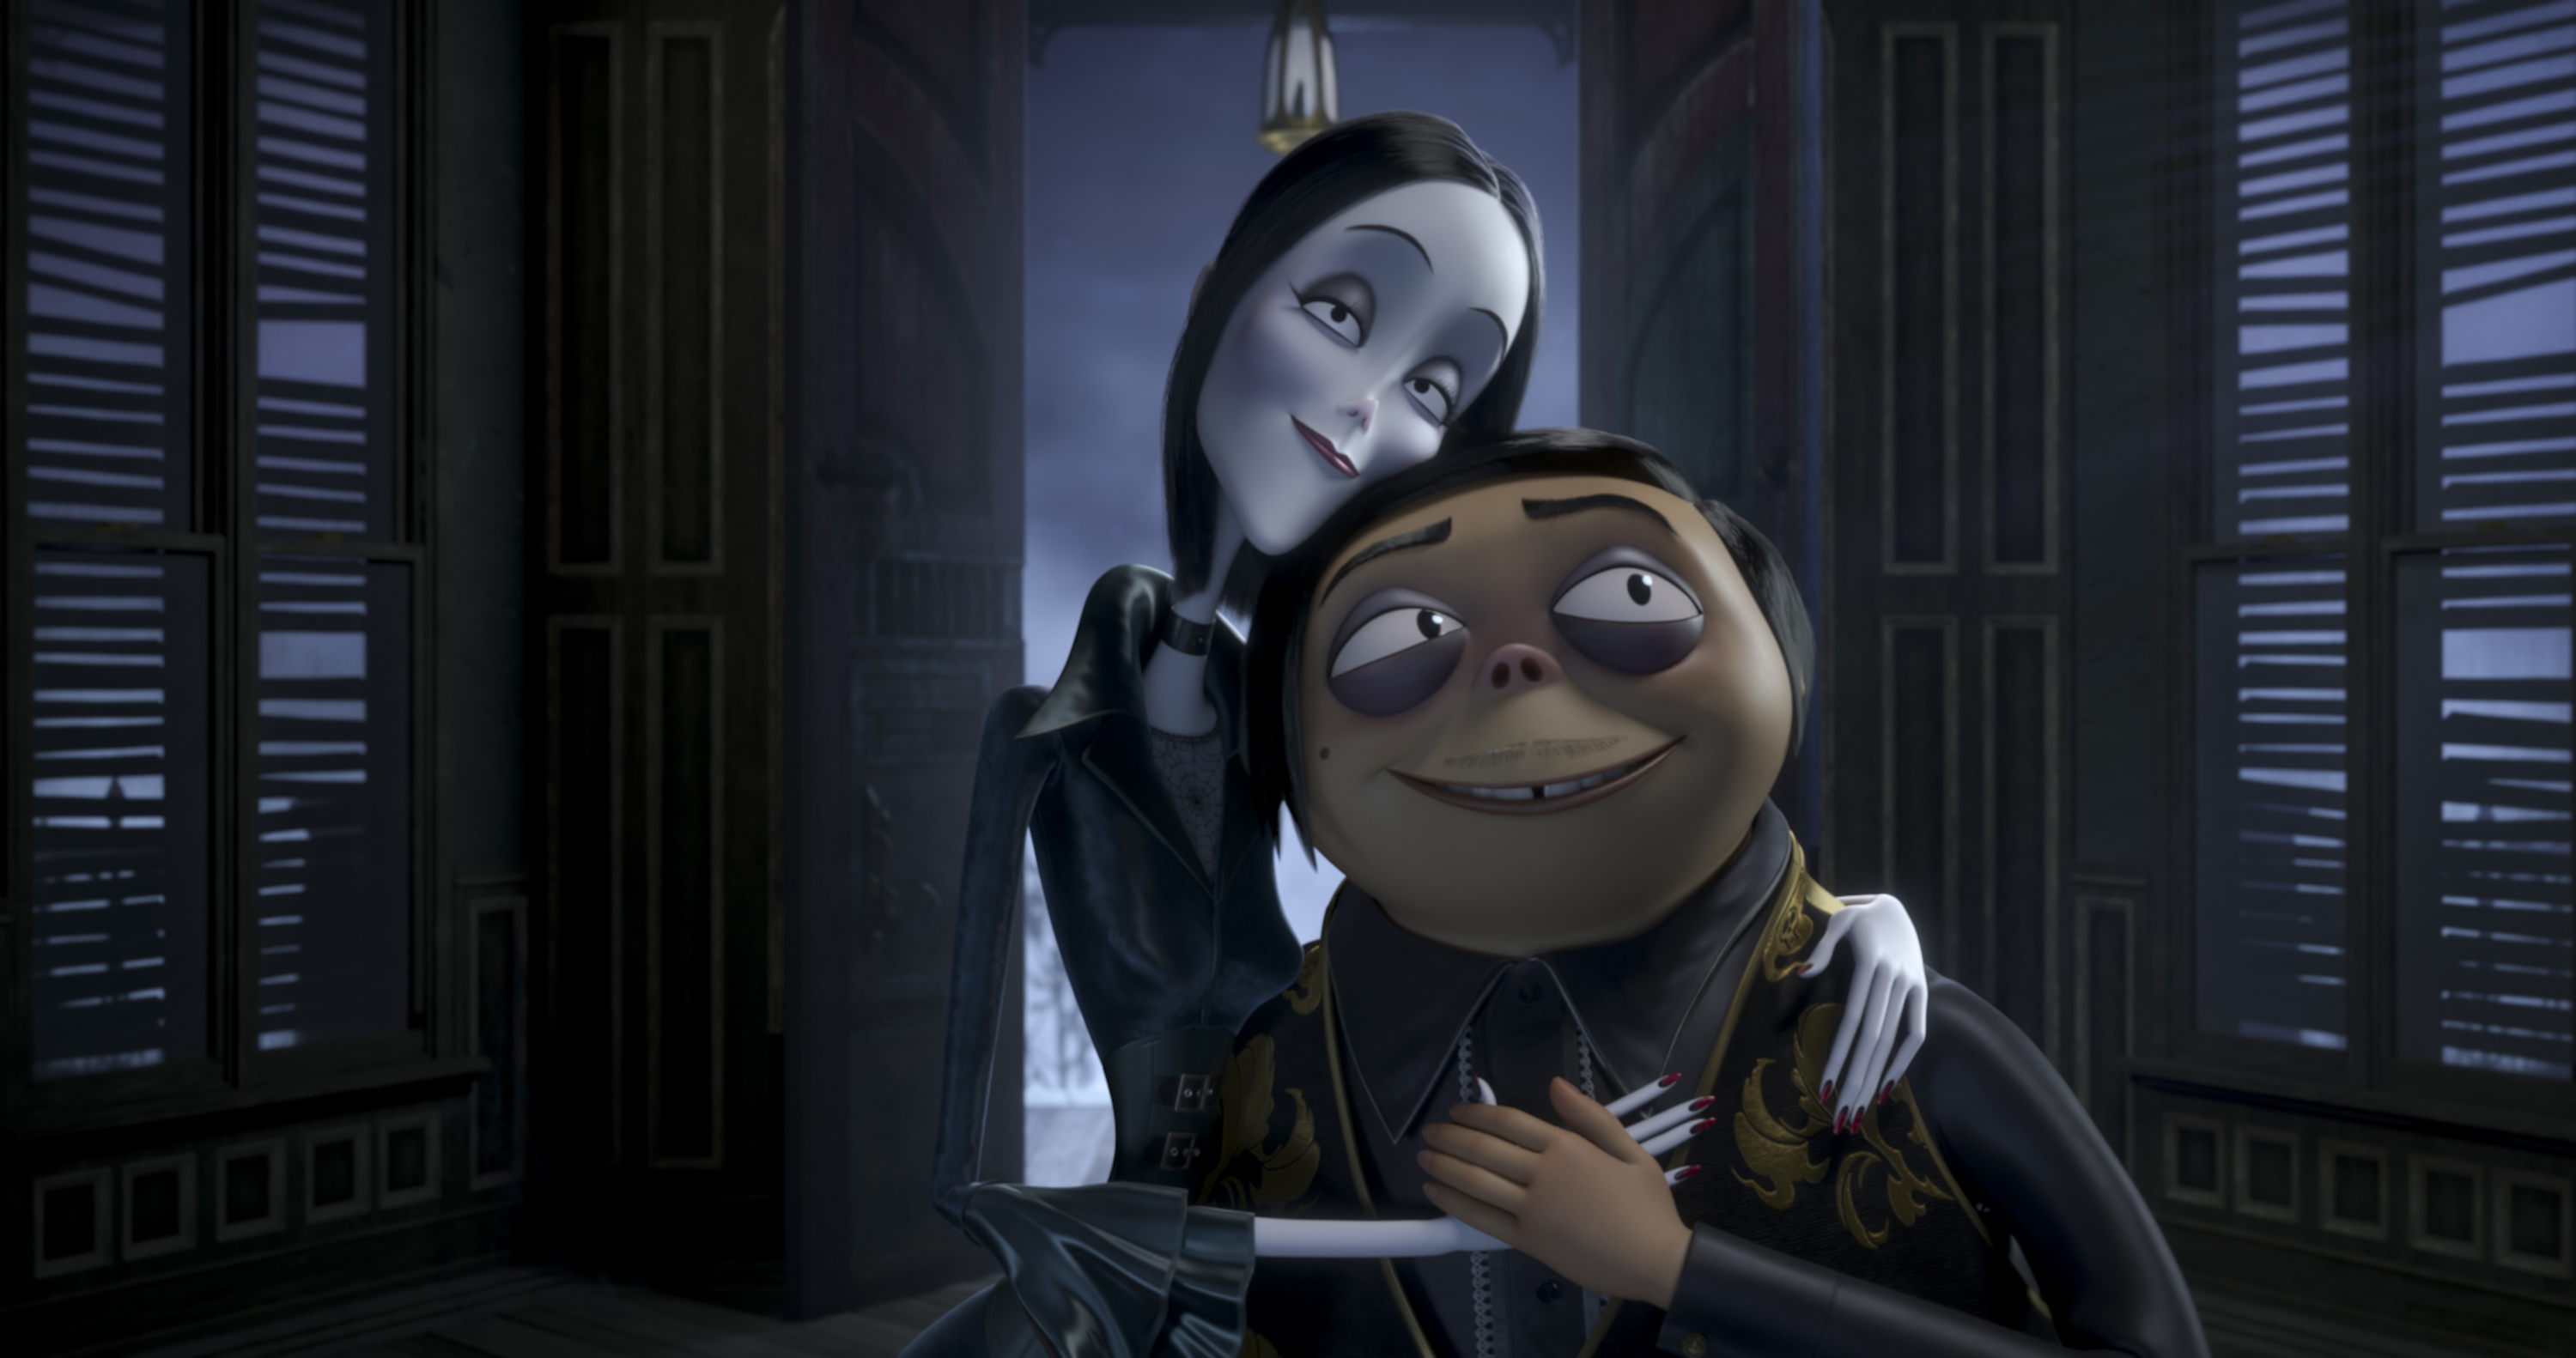 Movie The Addams Family (2019) HD Wallpaper | Background Image